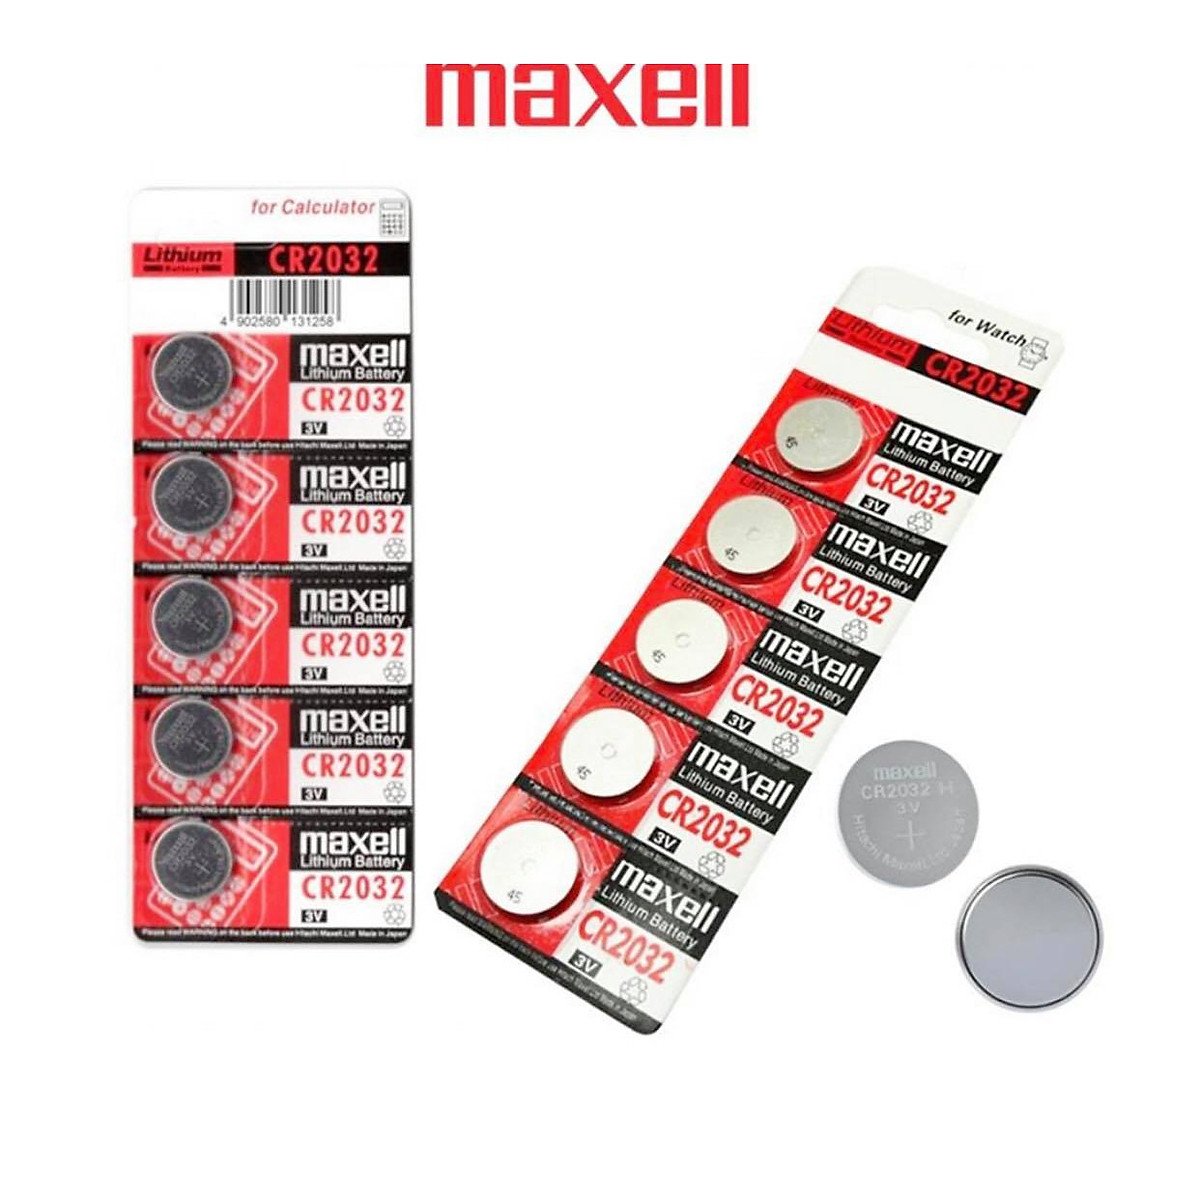 Lithium Battery Maxell CR2032 H 3V with Pins.